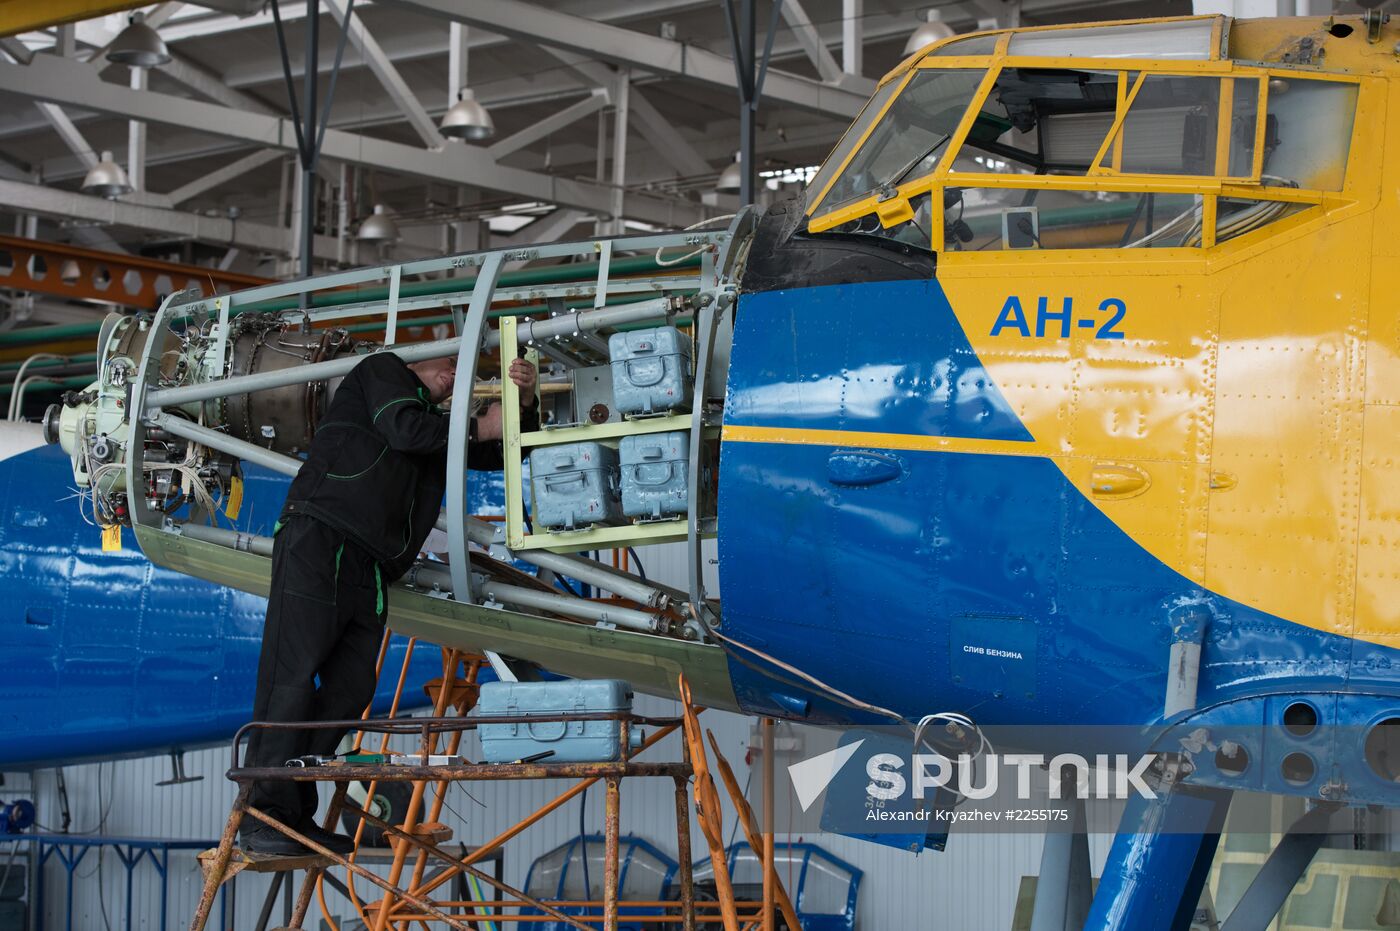 AN-2-110 upgraded at Chaplygin Aeronautical Research Institute